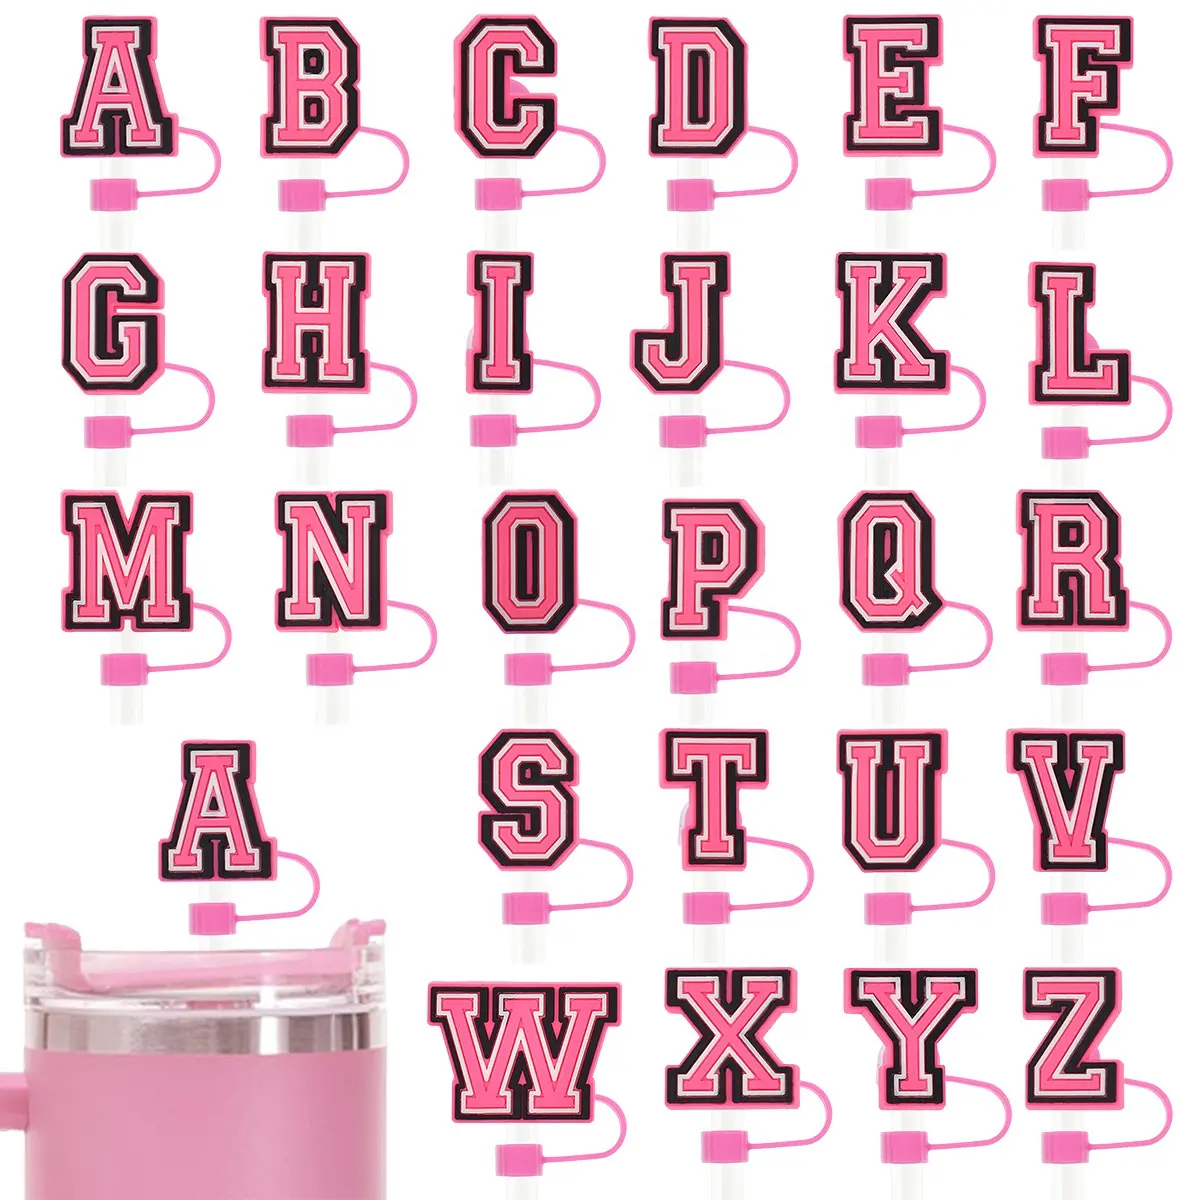 10mm Pink English Letters Reusable Silicone Straw Covers and Caps Compatible with Stanley Cups Dust-Proof Straw Cap